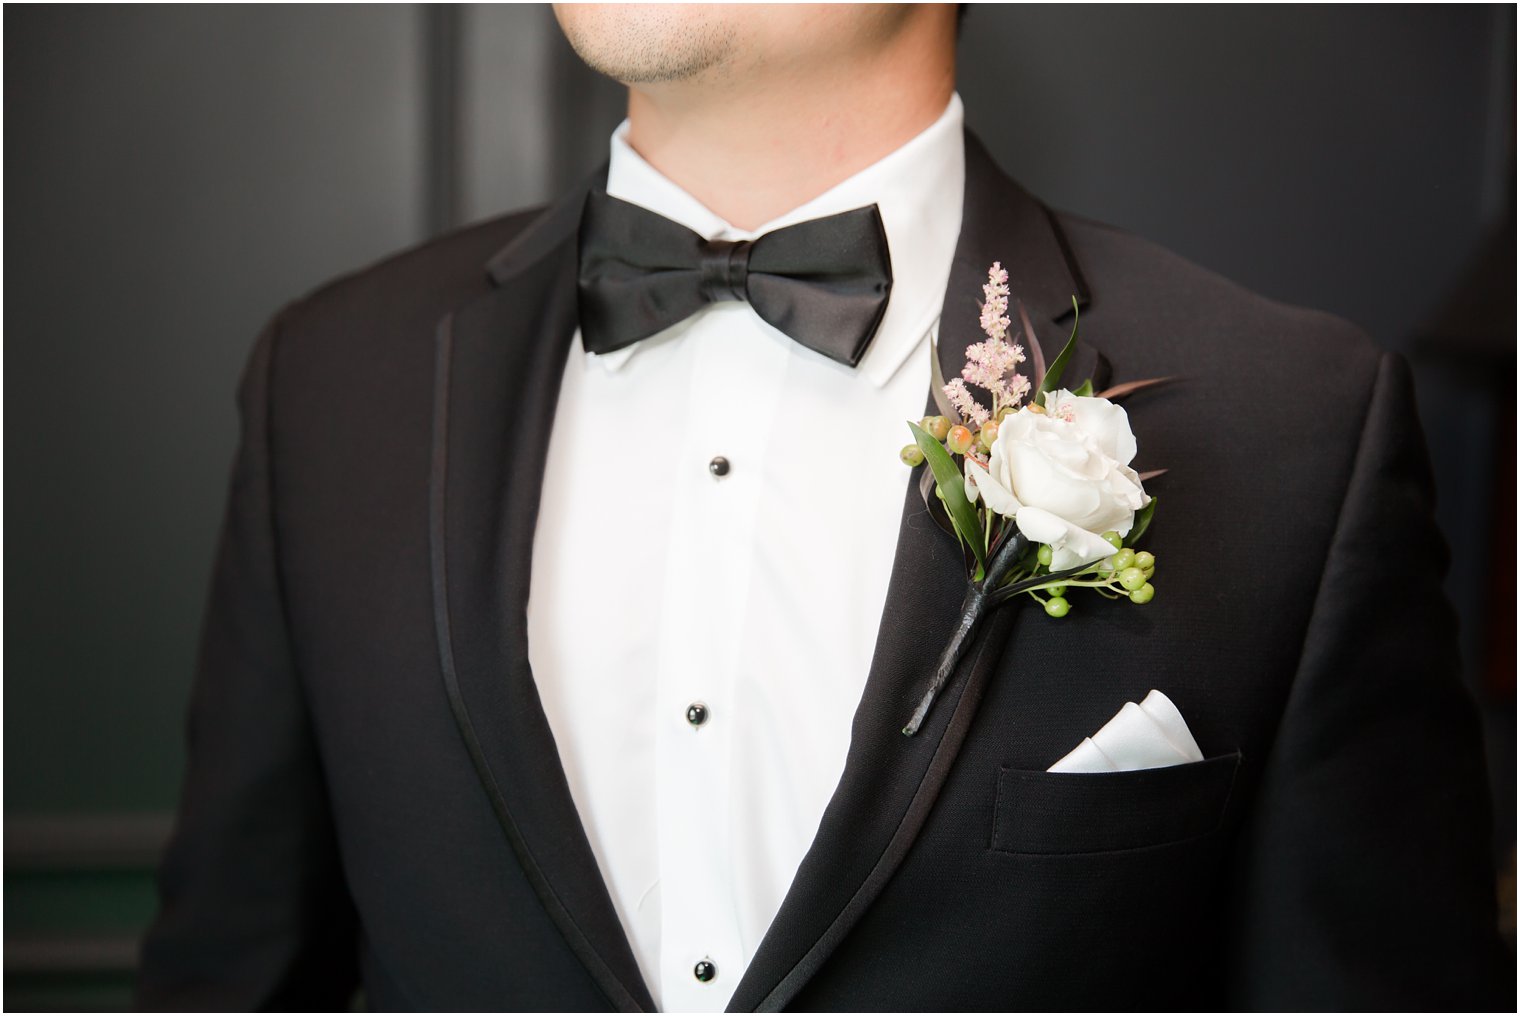 groom's boutonniere by Petal Pushers Magnolia